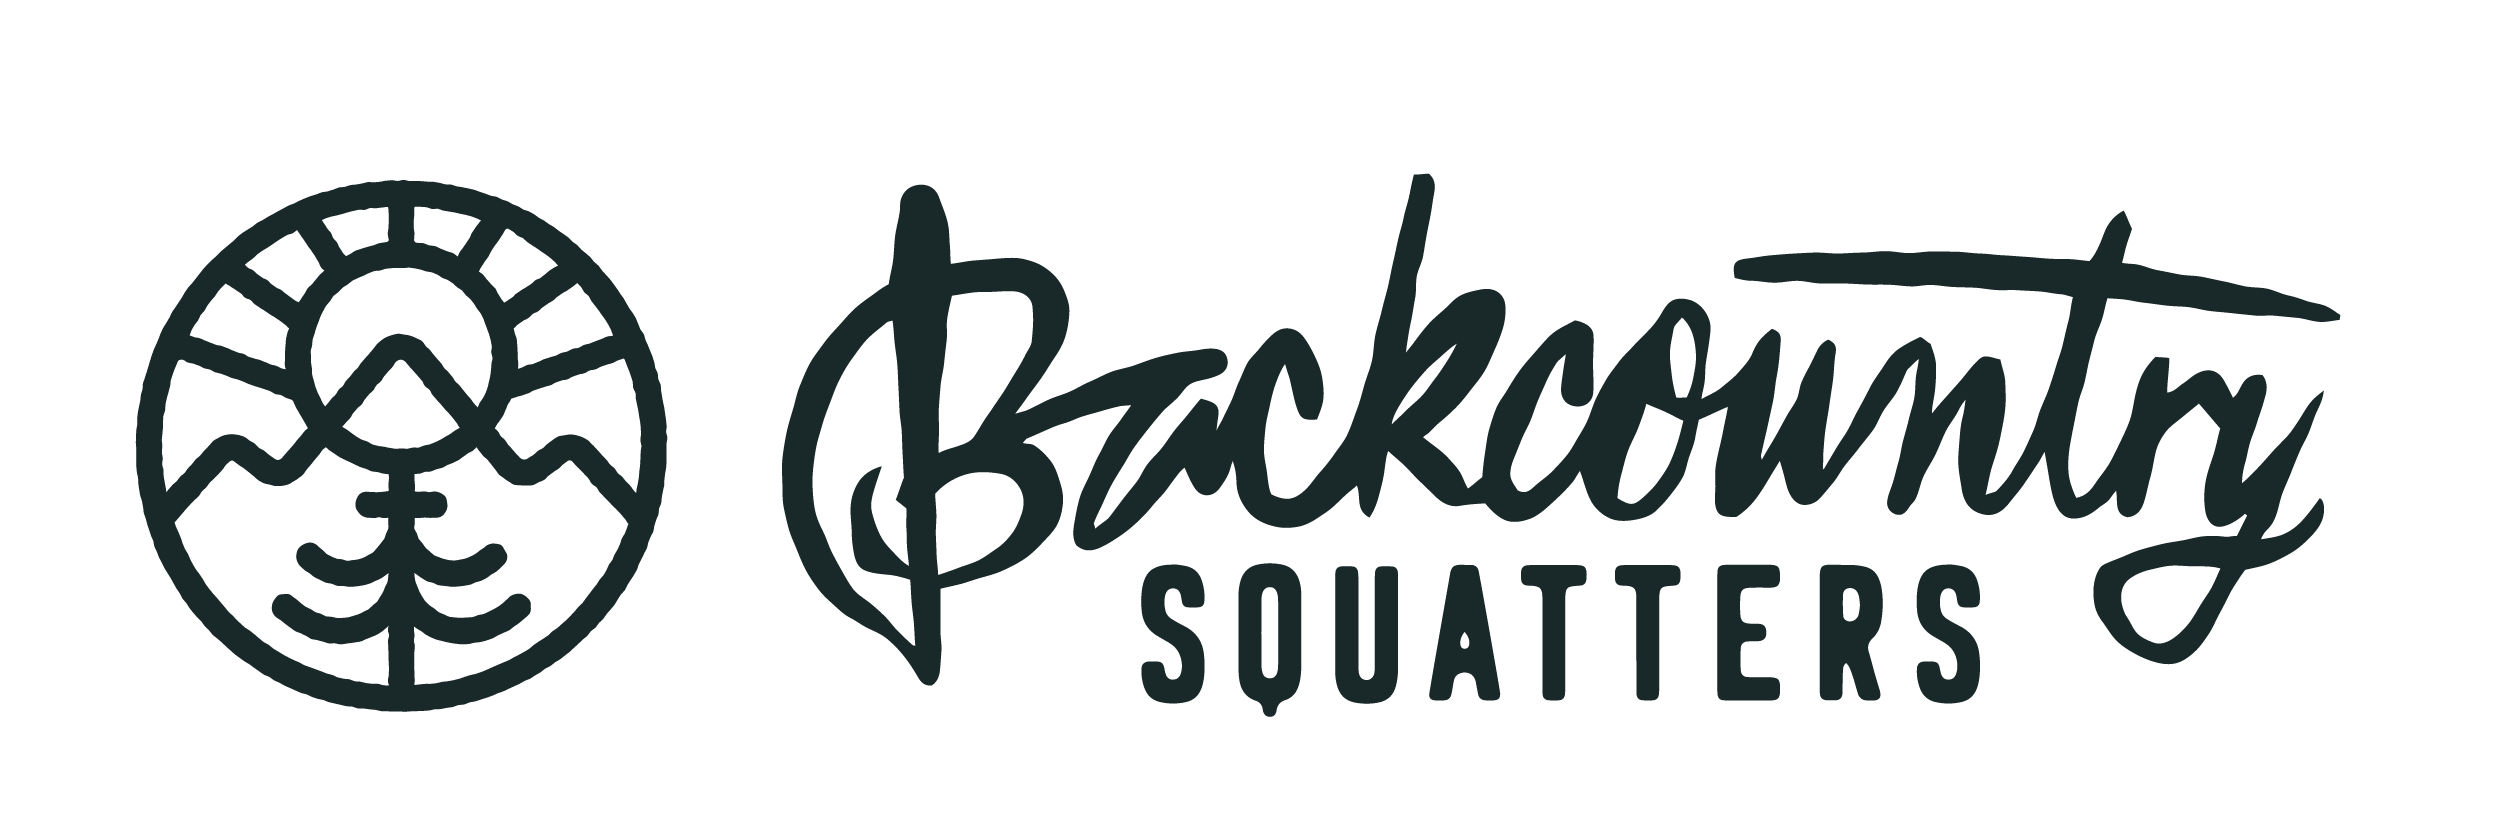 Backcountry Squatters